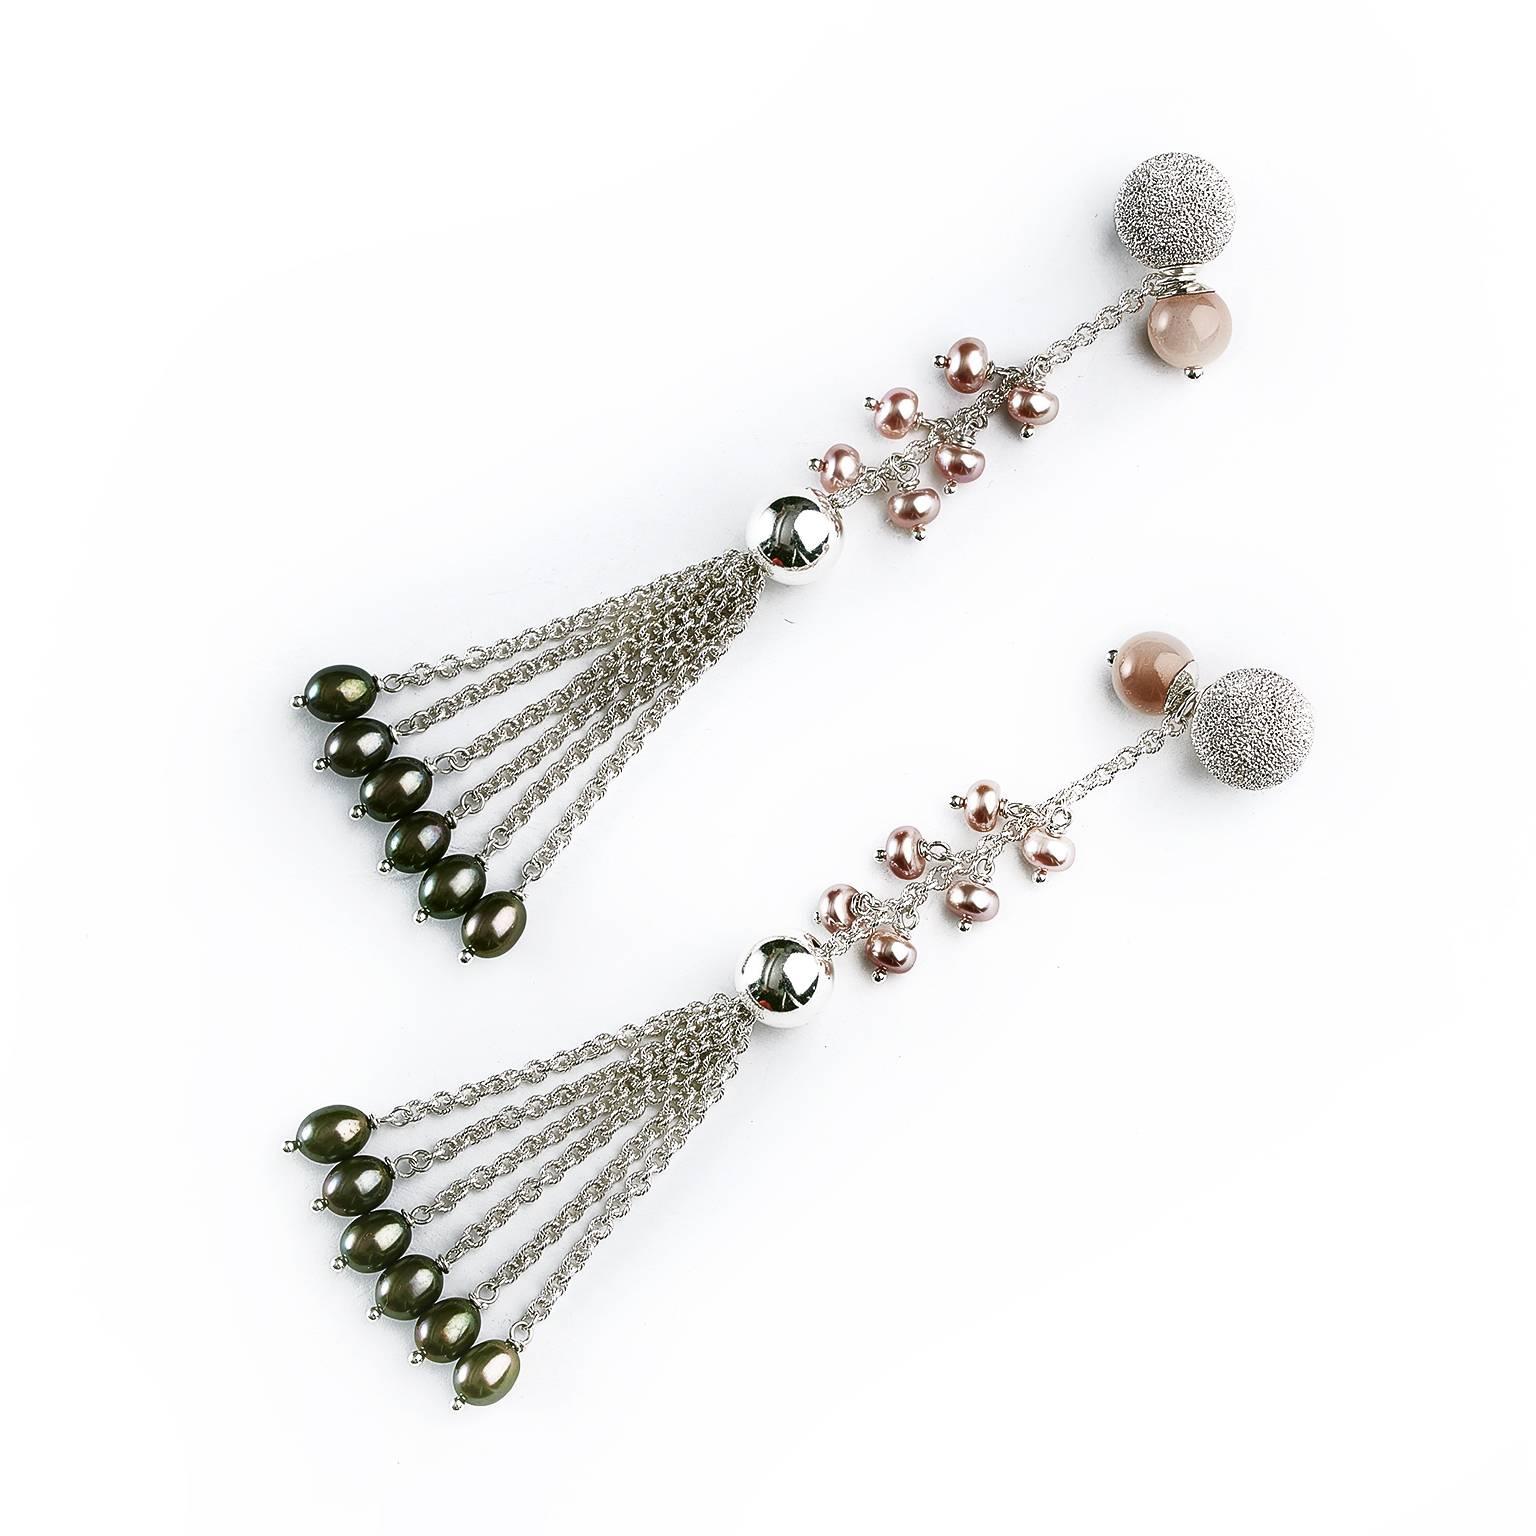 The classic and feminine earrings can warn as a captured through the perfect combination of peach moonstone with pink & black cultured pearls, connected by a sterling silver chain tassel in these stunning two-in-one earrings. The bottom part of the